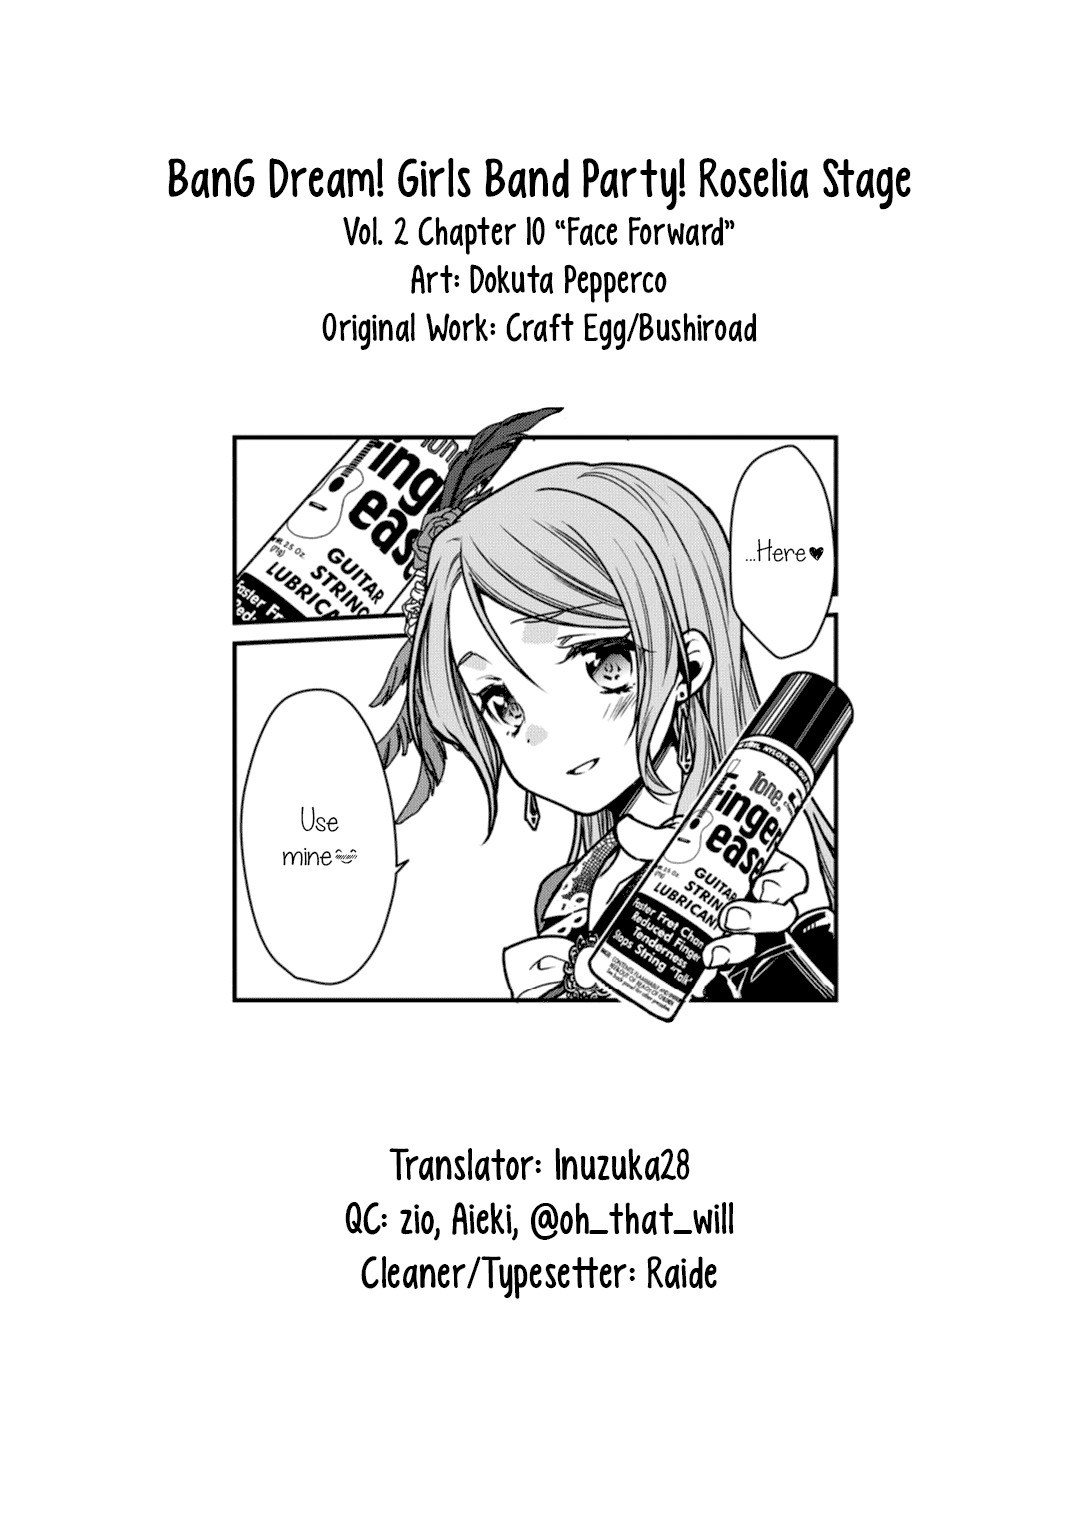 BanG Dream!: Girls Band Party! - Roselia Stage vol.2 ch.10